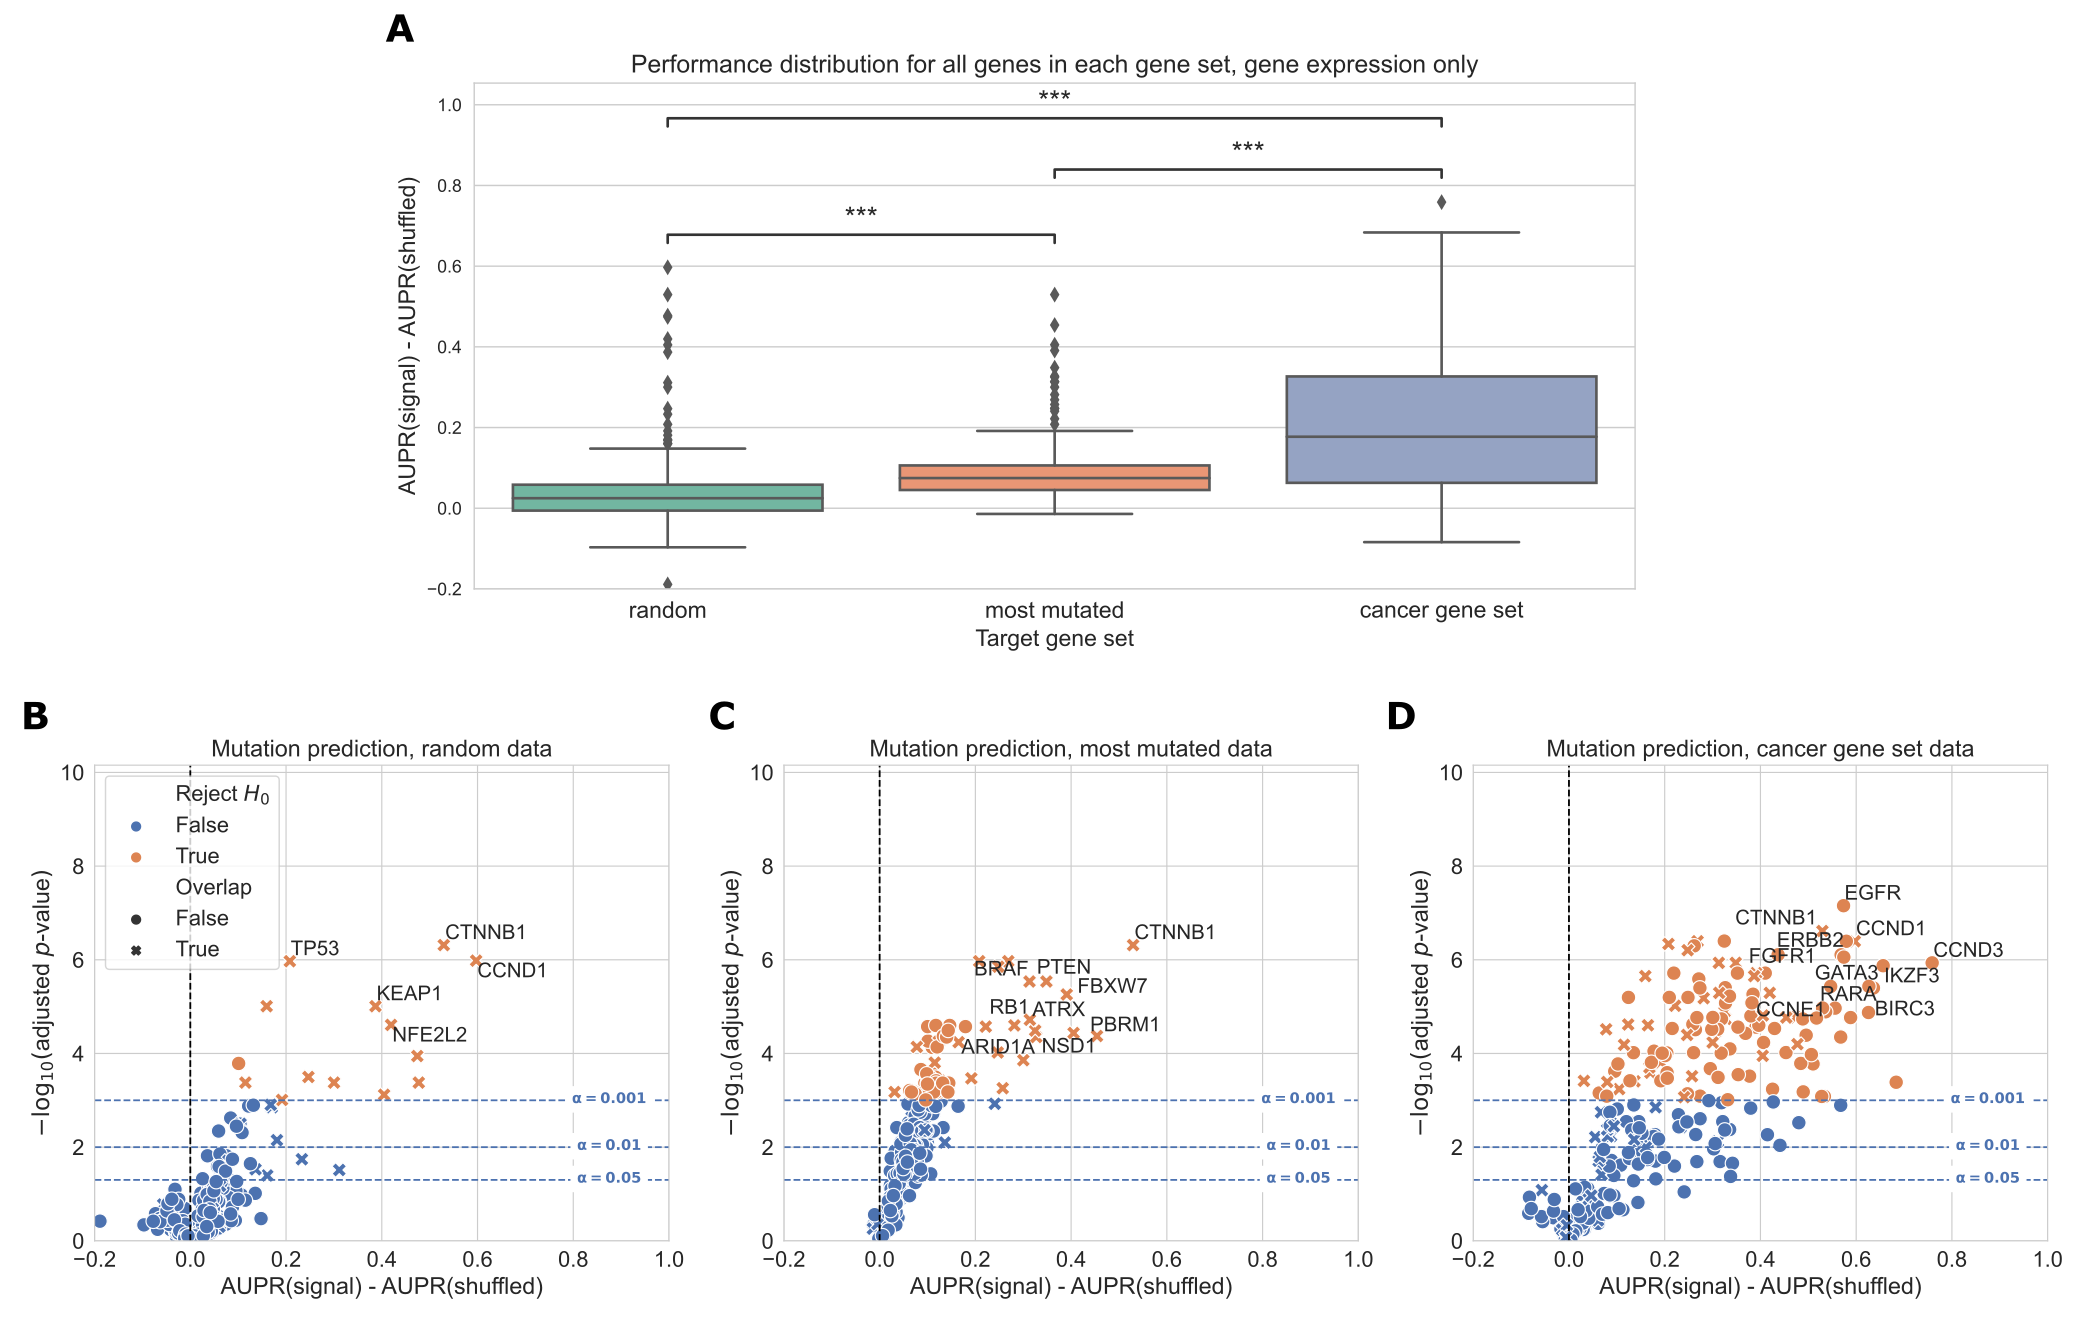 Figure 2: A. Overall distribution of performance across three gene sets, using gene expression (RNA-seq) data to predict mutations. Each data point represents the mean cross-validated AUPR difference, compared with a baseline model trained on permuted mutation presence/absence labels, for one gene in the given gene set; notches show bootstrapped 95% confidence intervals. “random” = 268 random genes, “most mutated” = 268 most mutated genes, “cancer gene set” = 268 cancer related genes from curated gene sets. Significance stars indicate results of Bonferroni-corrected pairwise Wilcoxon tests: **: p < 0.01, ***: p < 0.001, ns: not statistically significant for a cutoff of p = 0.05. B, C, D. Volcano-like plots showing mutation presence/absence predictive performance for each gene in each of the three gene sets. The x-axis shows the difference in mean AUPR compared with a baseline model trained on permuted labels, and the y-axis shows p-values for a paired t-test comparing cross-validated AUPR values within folds. Points (genes) marked with an “X” are overlapping between the cancer gene set and either the random or most mutated gene set.